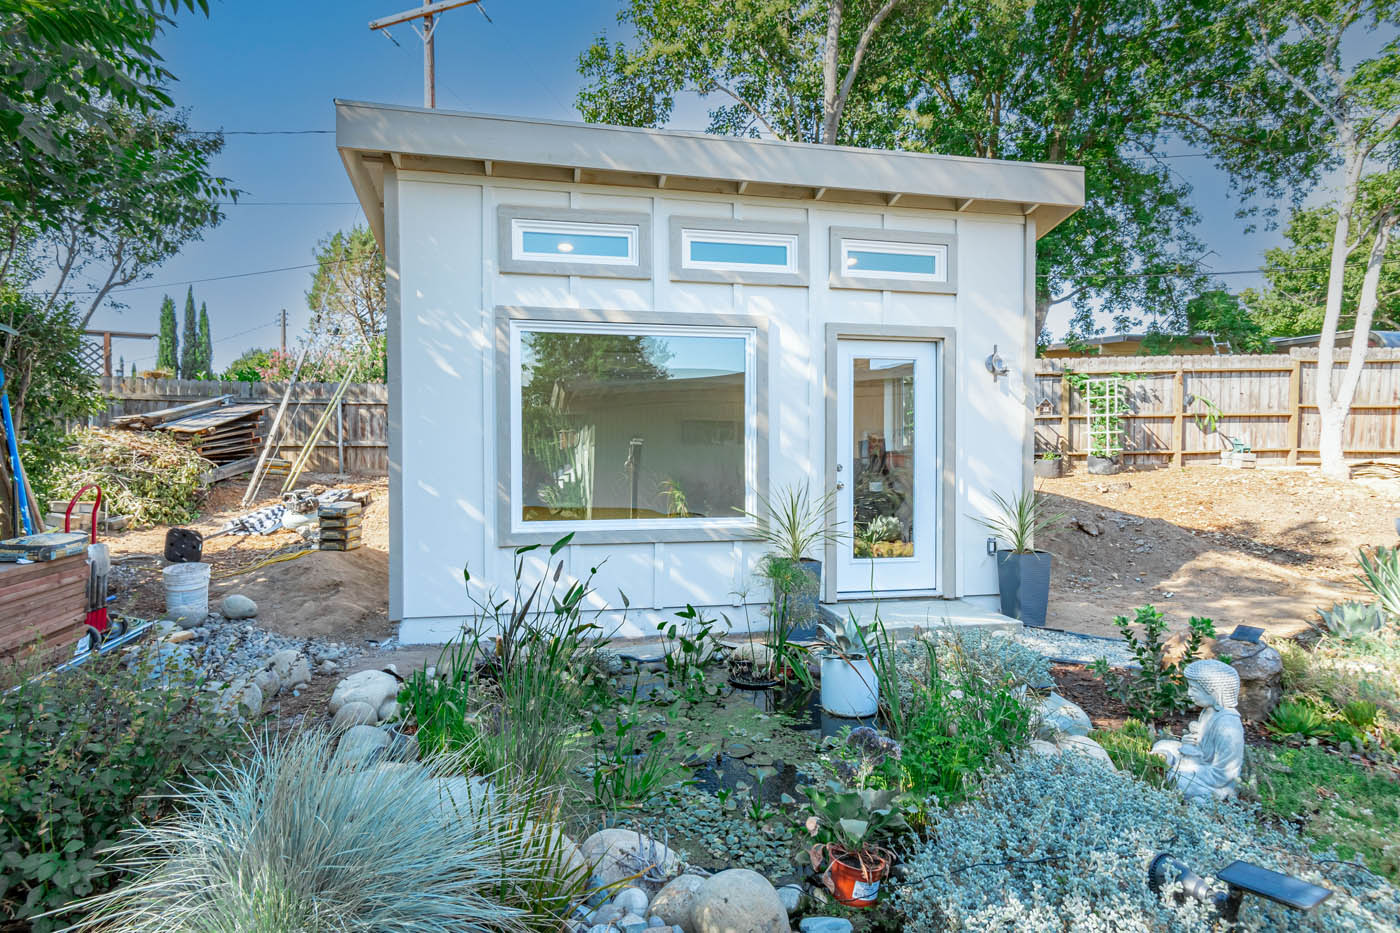 A Keene / Conway detached ADU in a California backyard by a pool, learn more about our best tiny home builder in Keene / Conway.